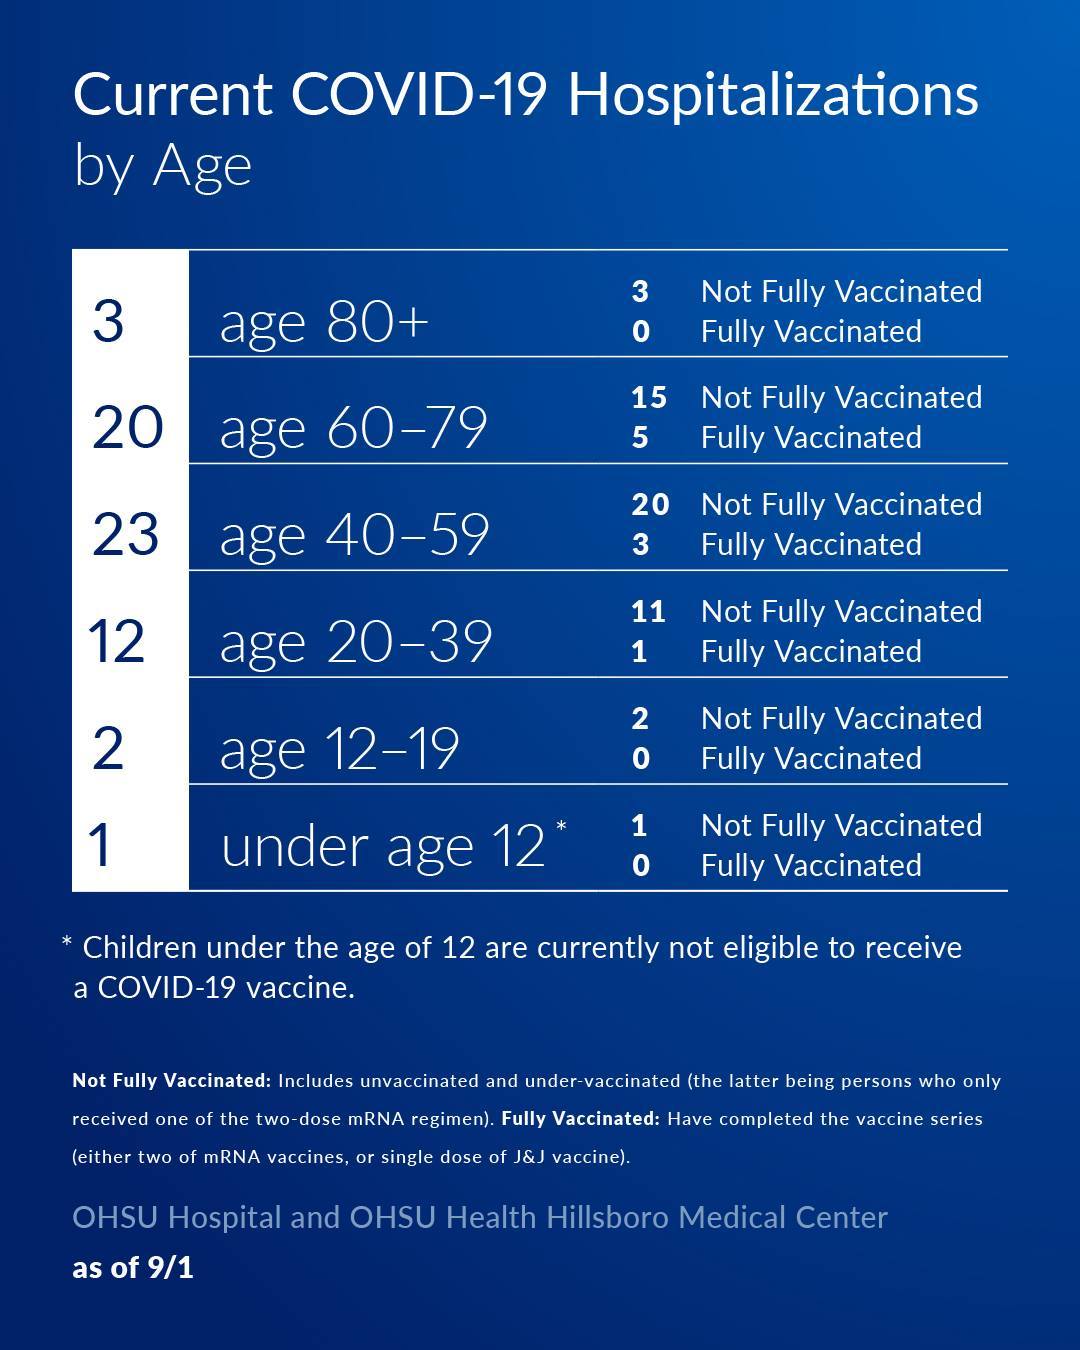 hospitalizations by age at OHSU 